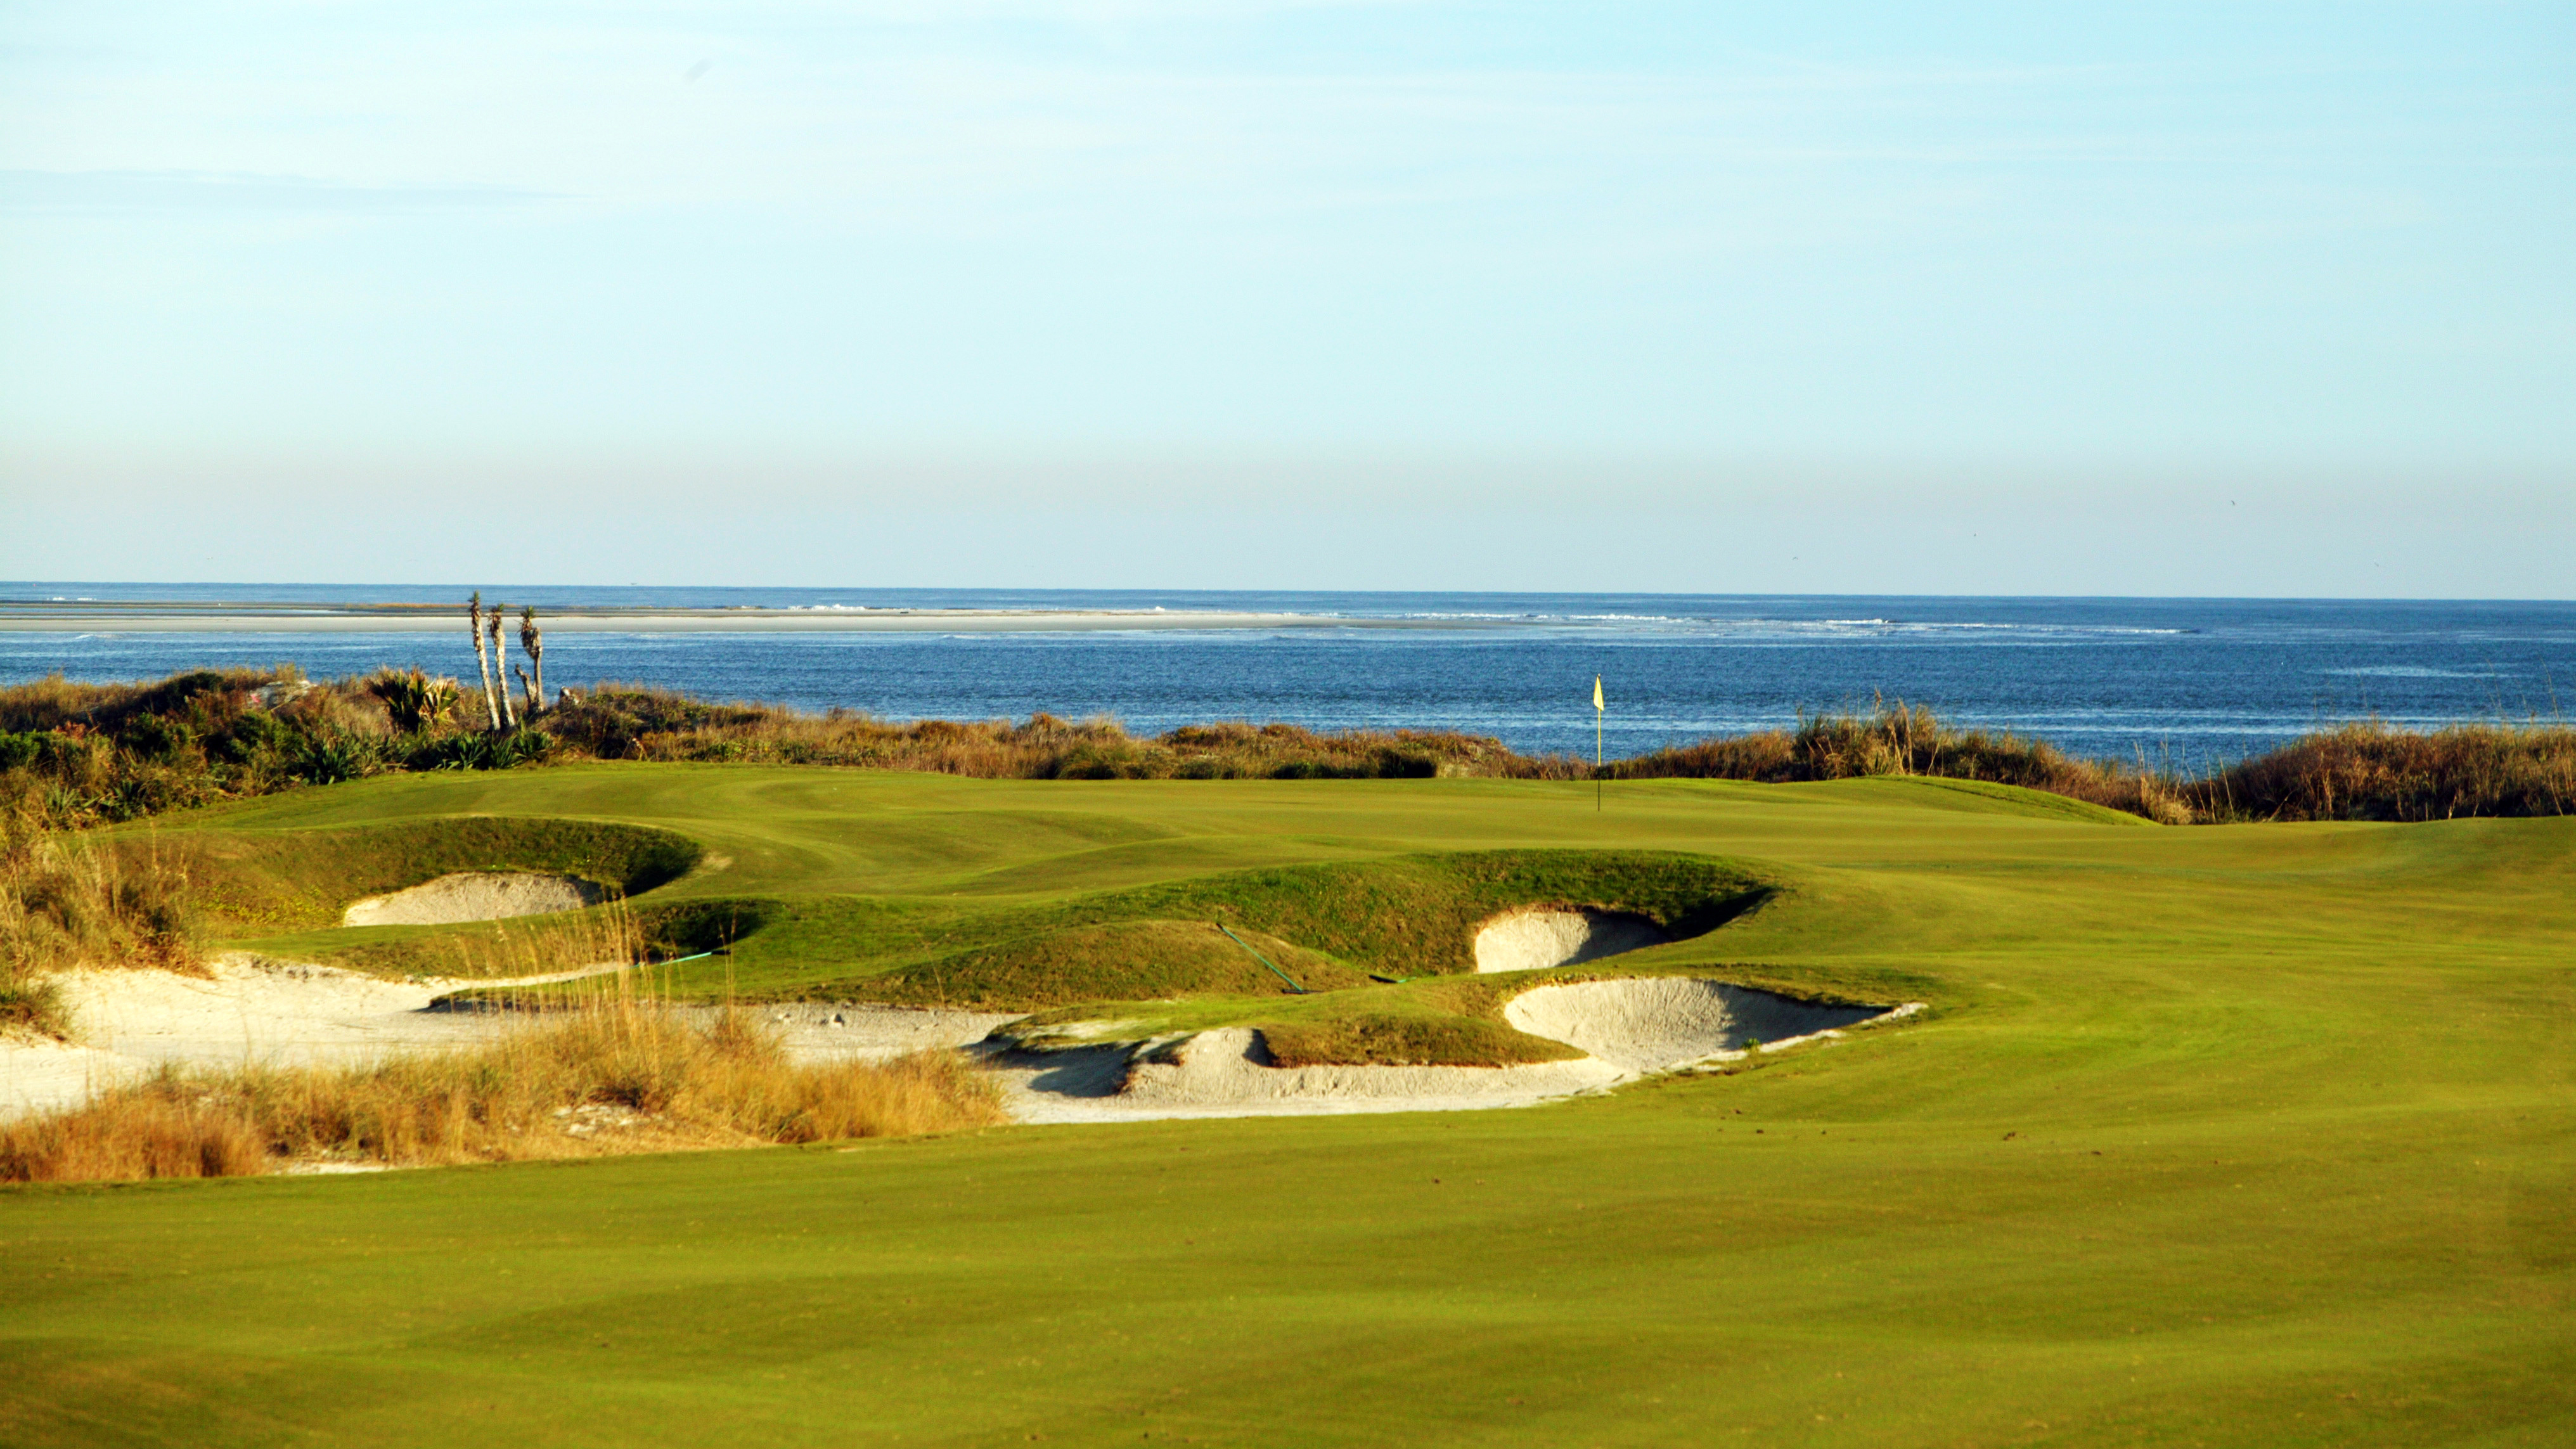 The Ocean Course will test the very best